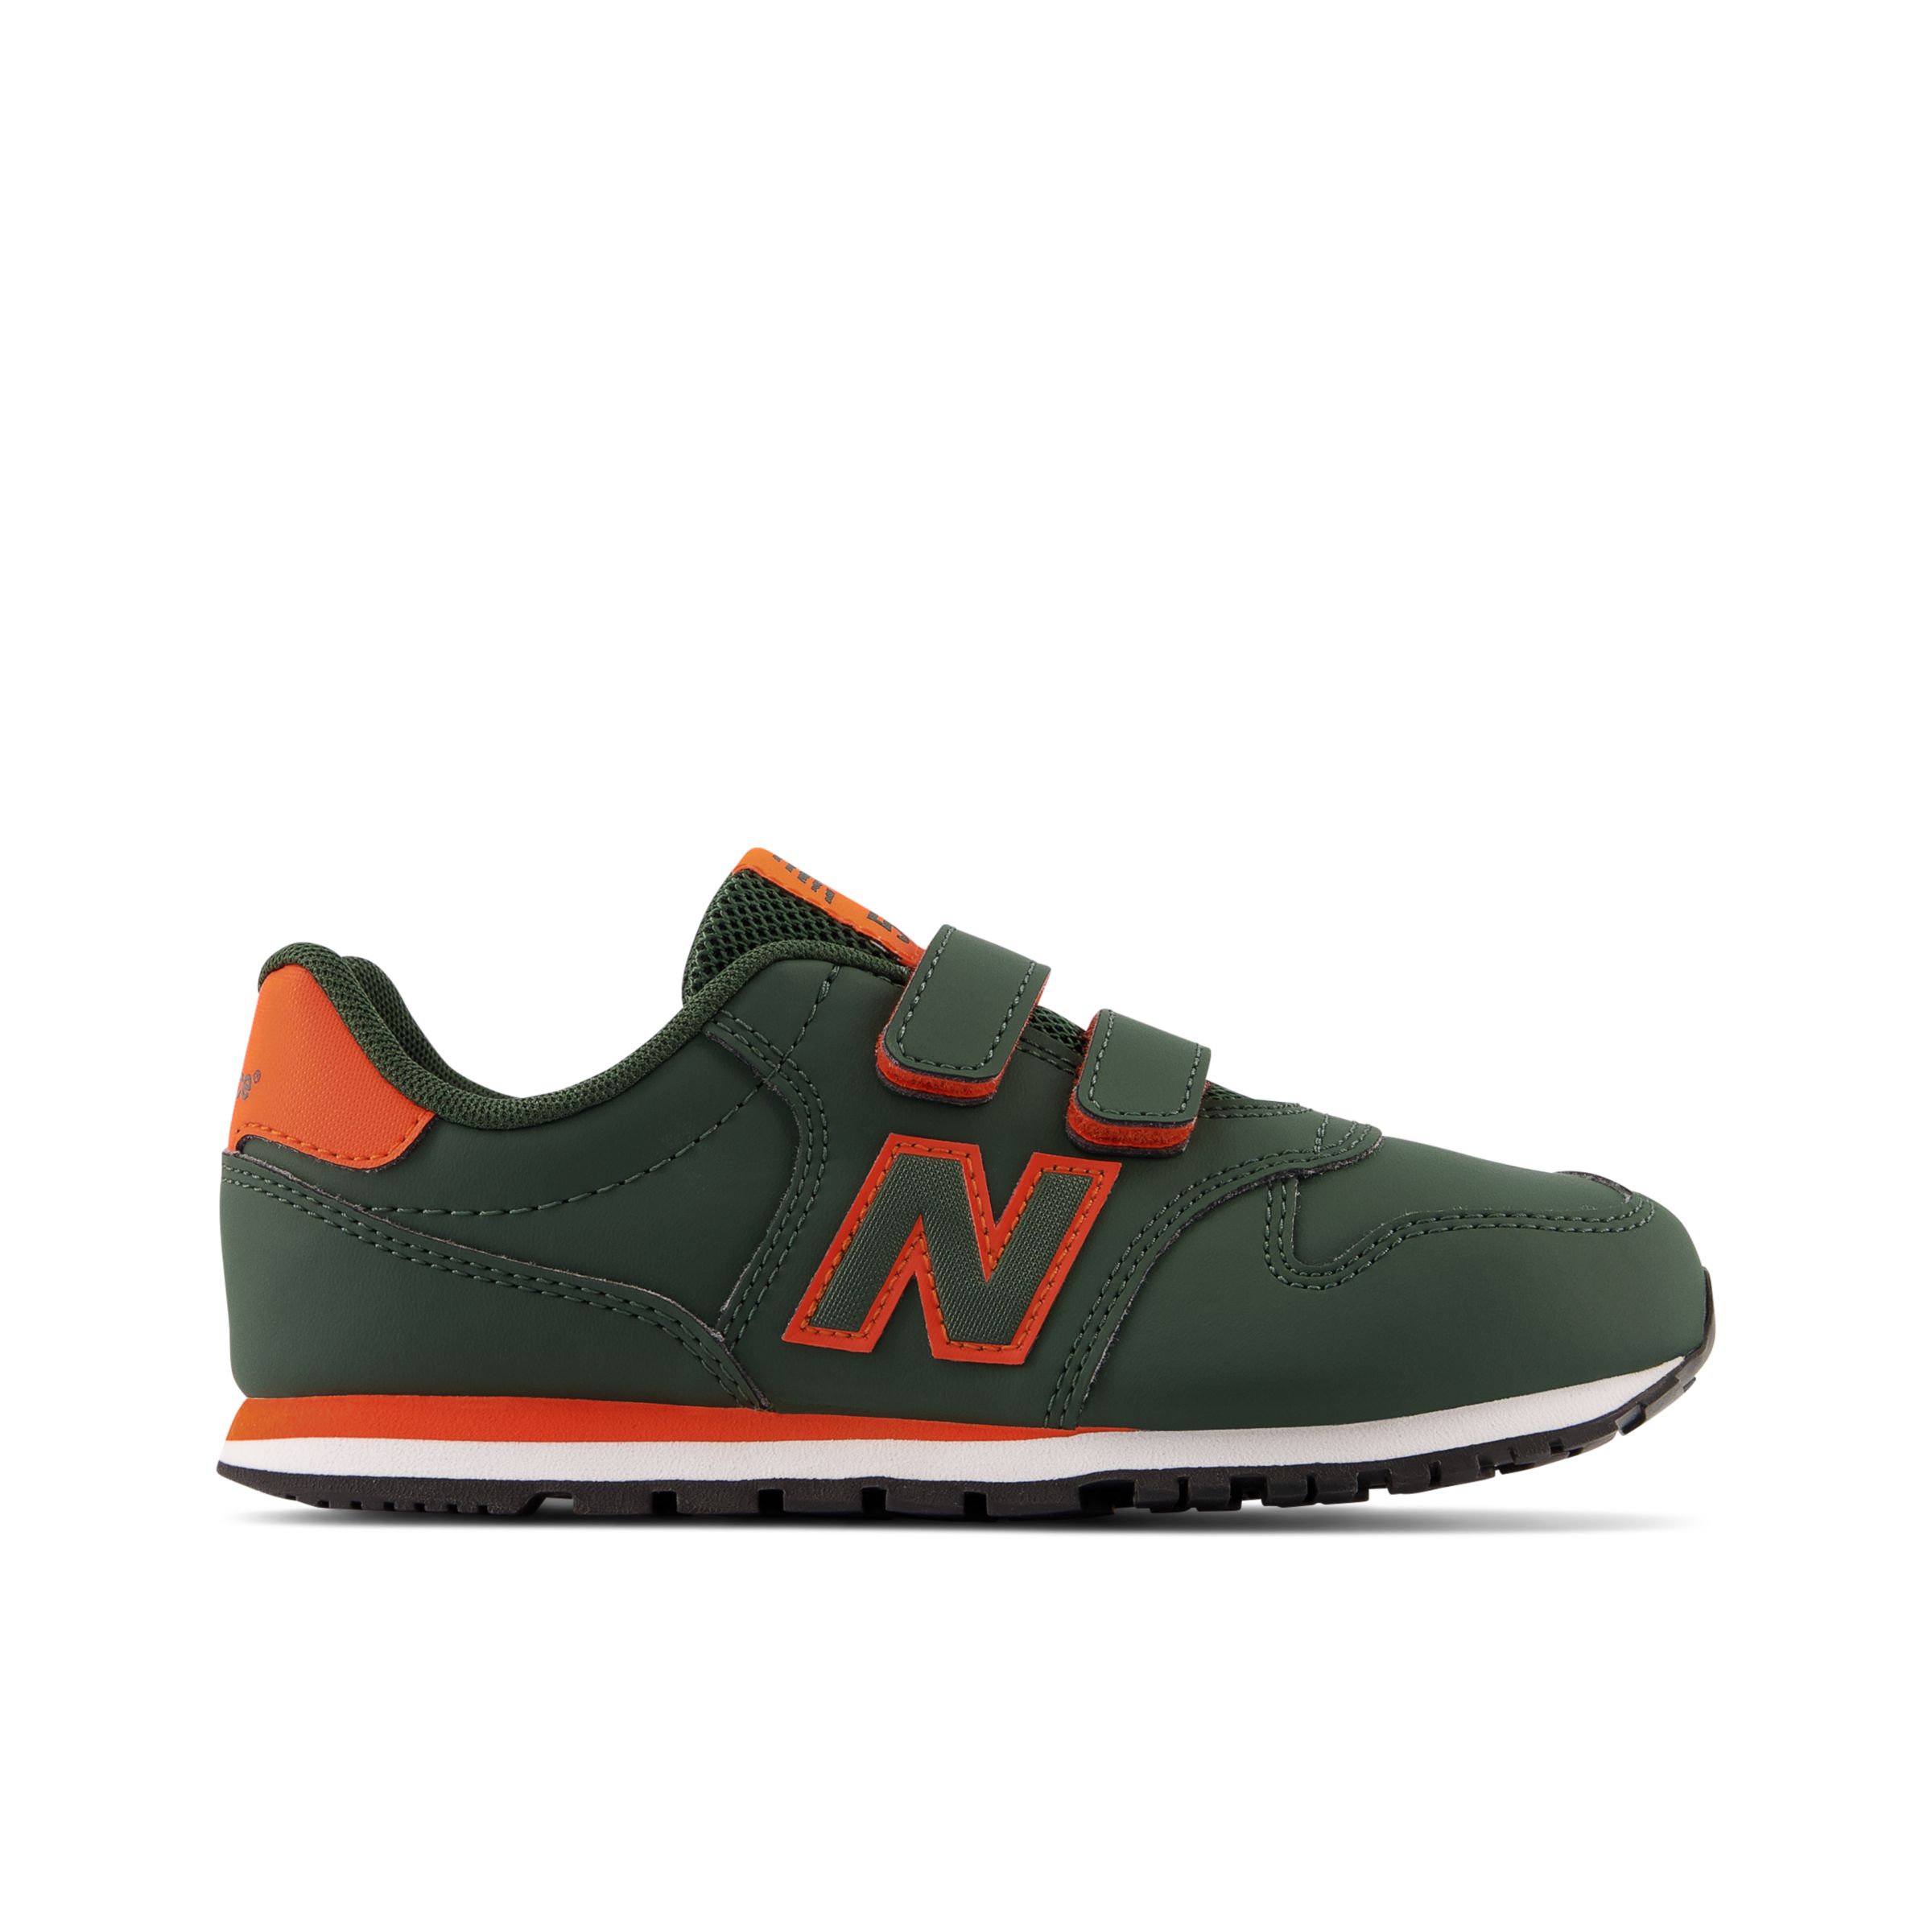 Top4Running talla 30.5, 33.5 | LetrasShops, Intersport, 41.5, FootShop, New Balance, Spartoo, 46.5 New Balance a Mountain of the 577, Outlet Sneakers en Amazon, 34.5